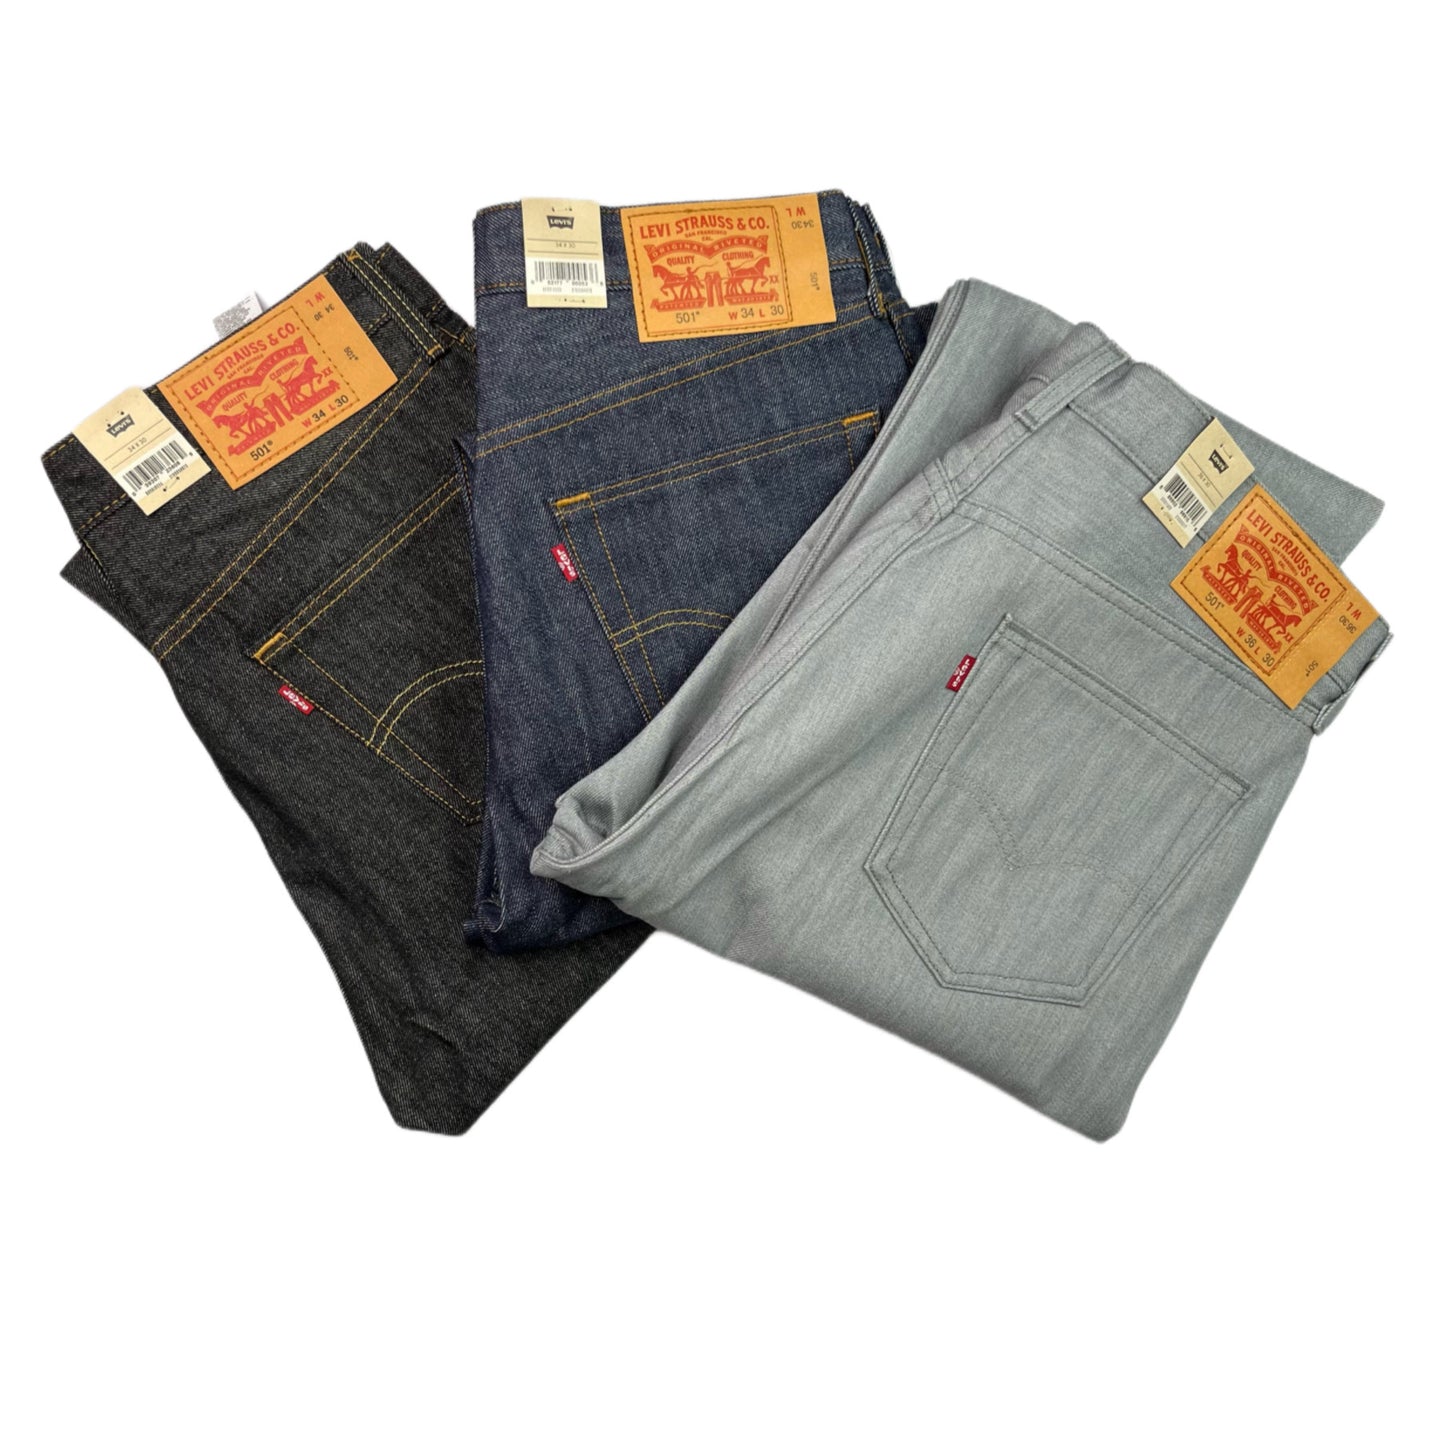 Levi's 501 Shrink-to-Fit